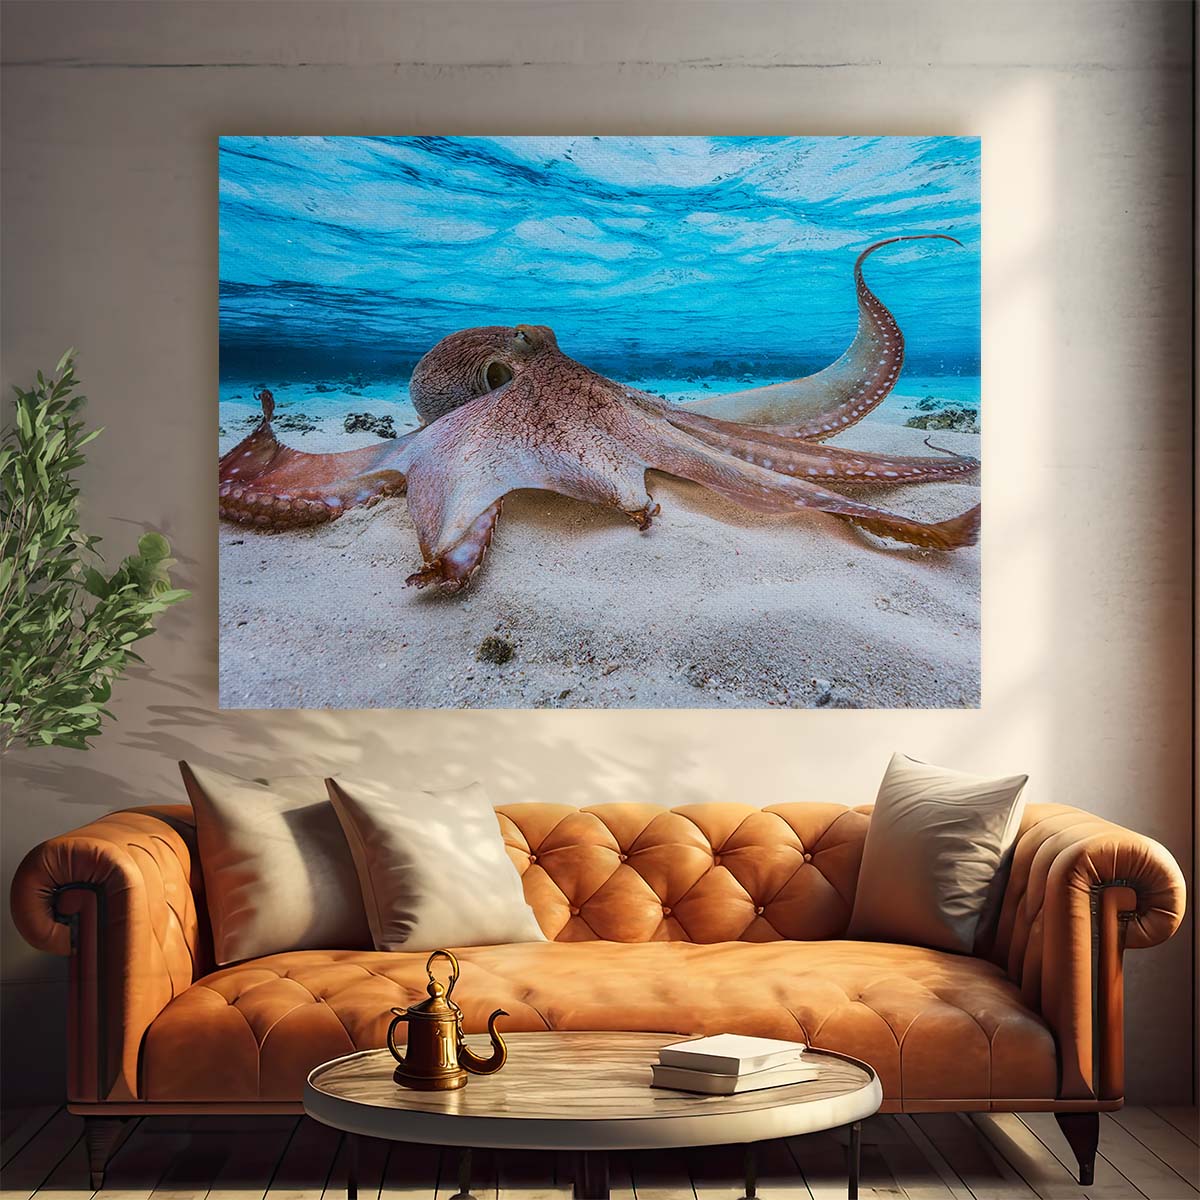 Octopus Oasis Underwater Seascape Wildlife Wall Art by Luxuriance Designs. Made in USA.